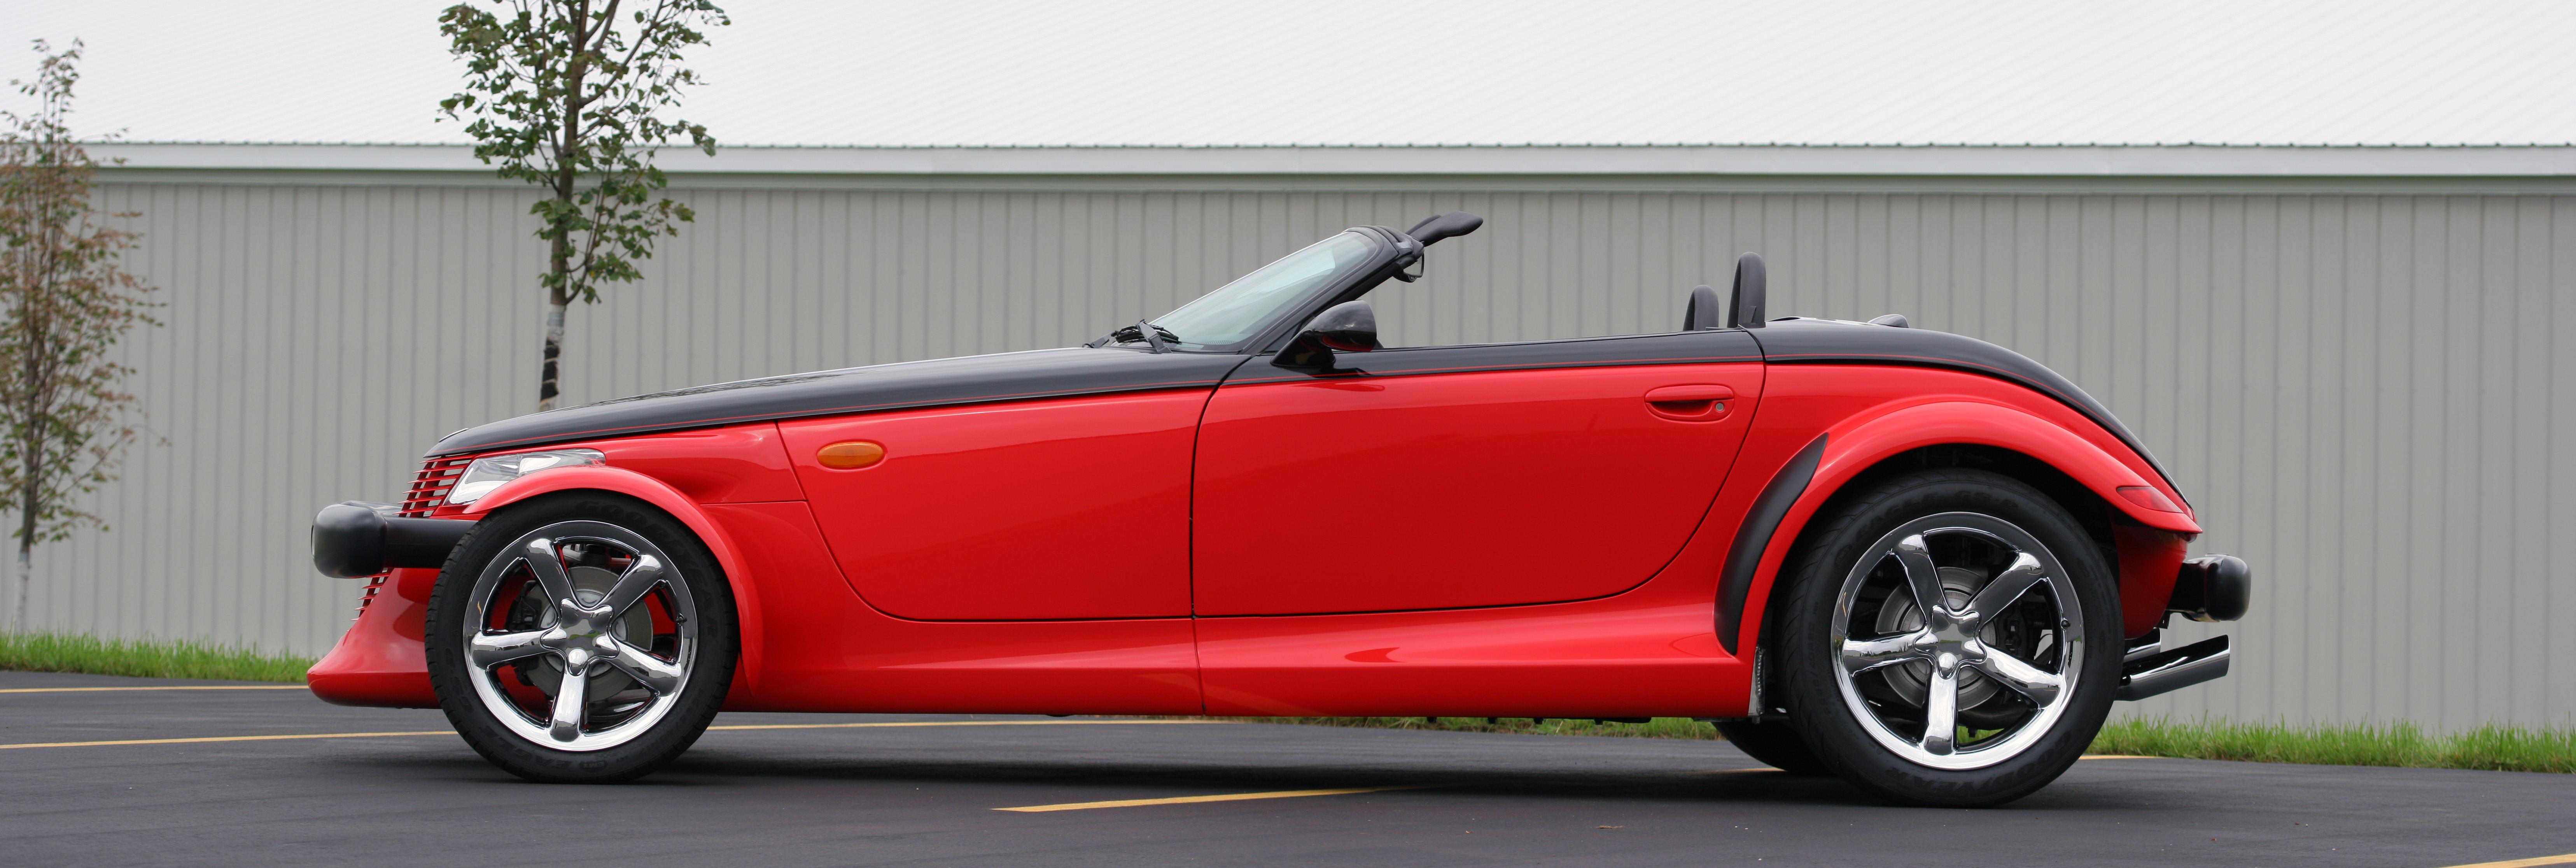 Best Mobile Plymouth Prowler Backgrounds